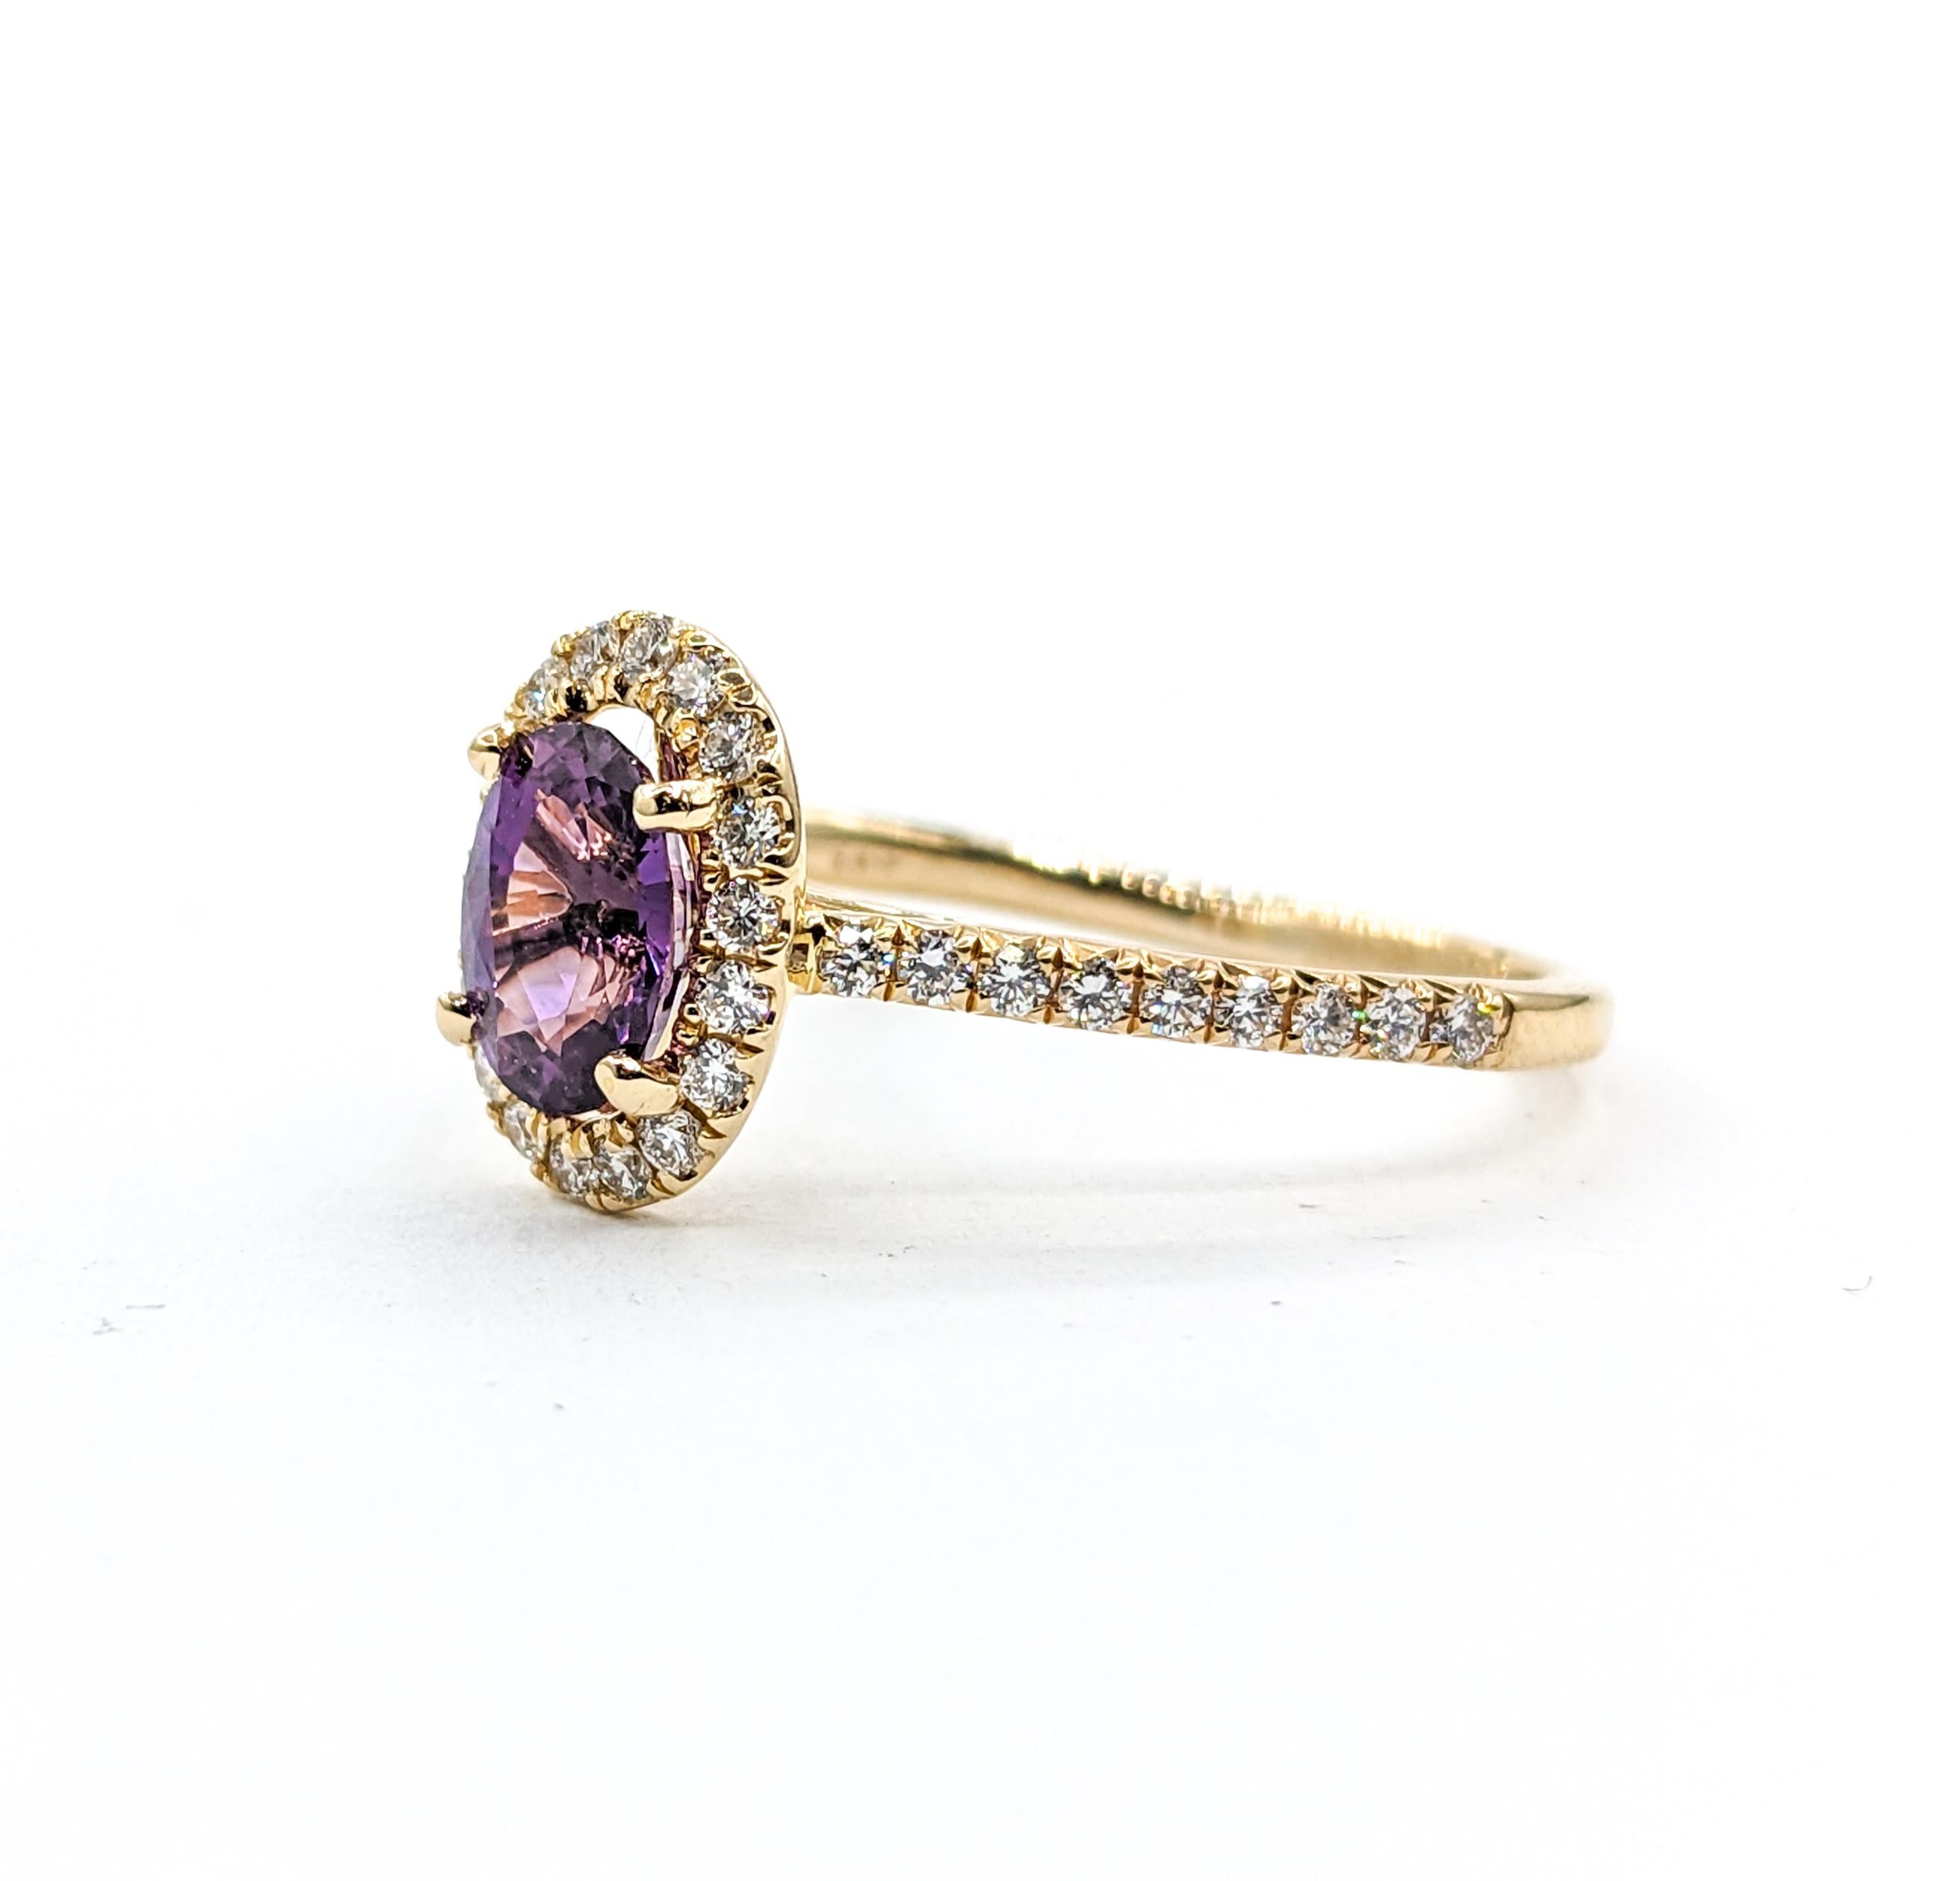 .84ct Deep Purple Spinel & Diamond Ring In Yellow Gold

Introducing our exquisite ring, masterfully crafted in 14k Yellow gold. At the center of this elegant design lies a .84ct  Natural Deep Purple spinel, adding a touch of luxurious depth and